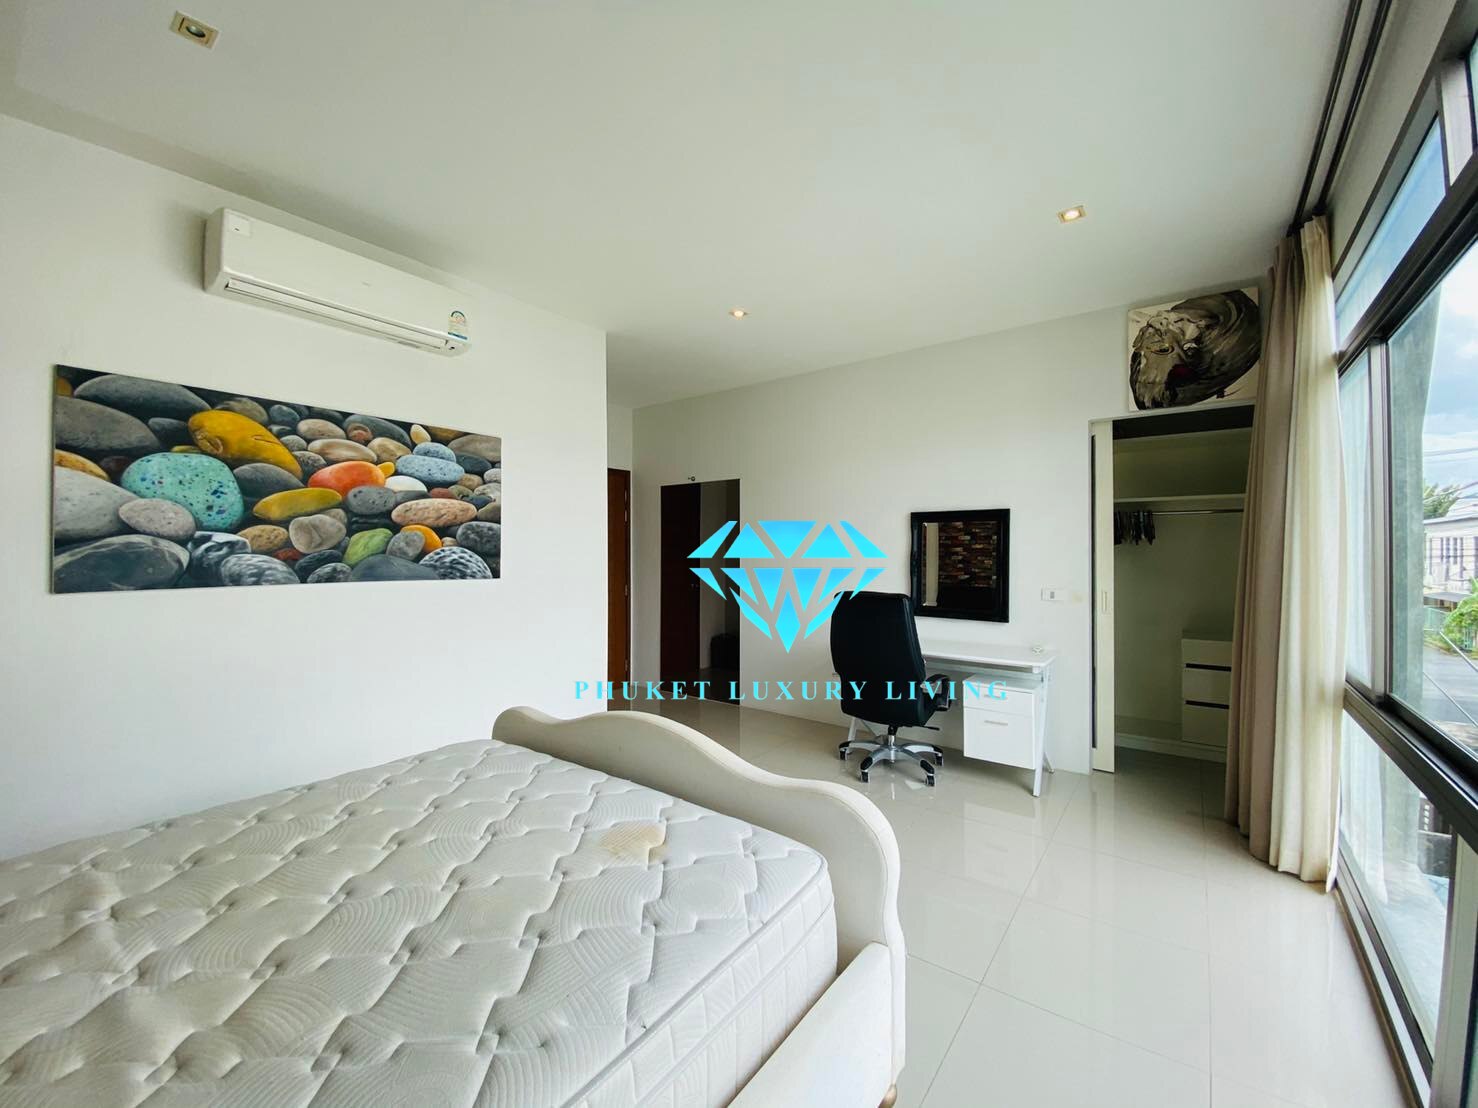 2 bed townhome, Evatown Phuket - For rent & sale